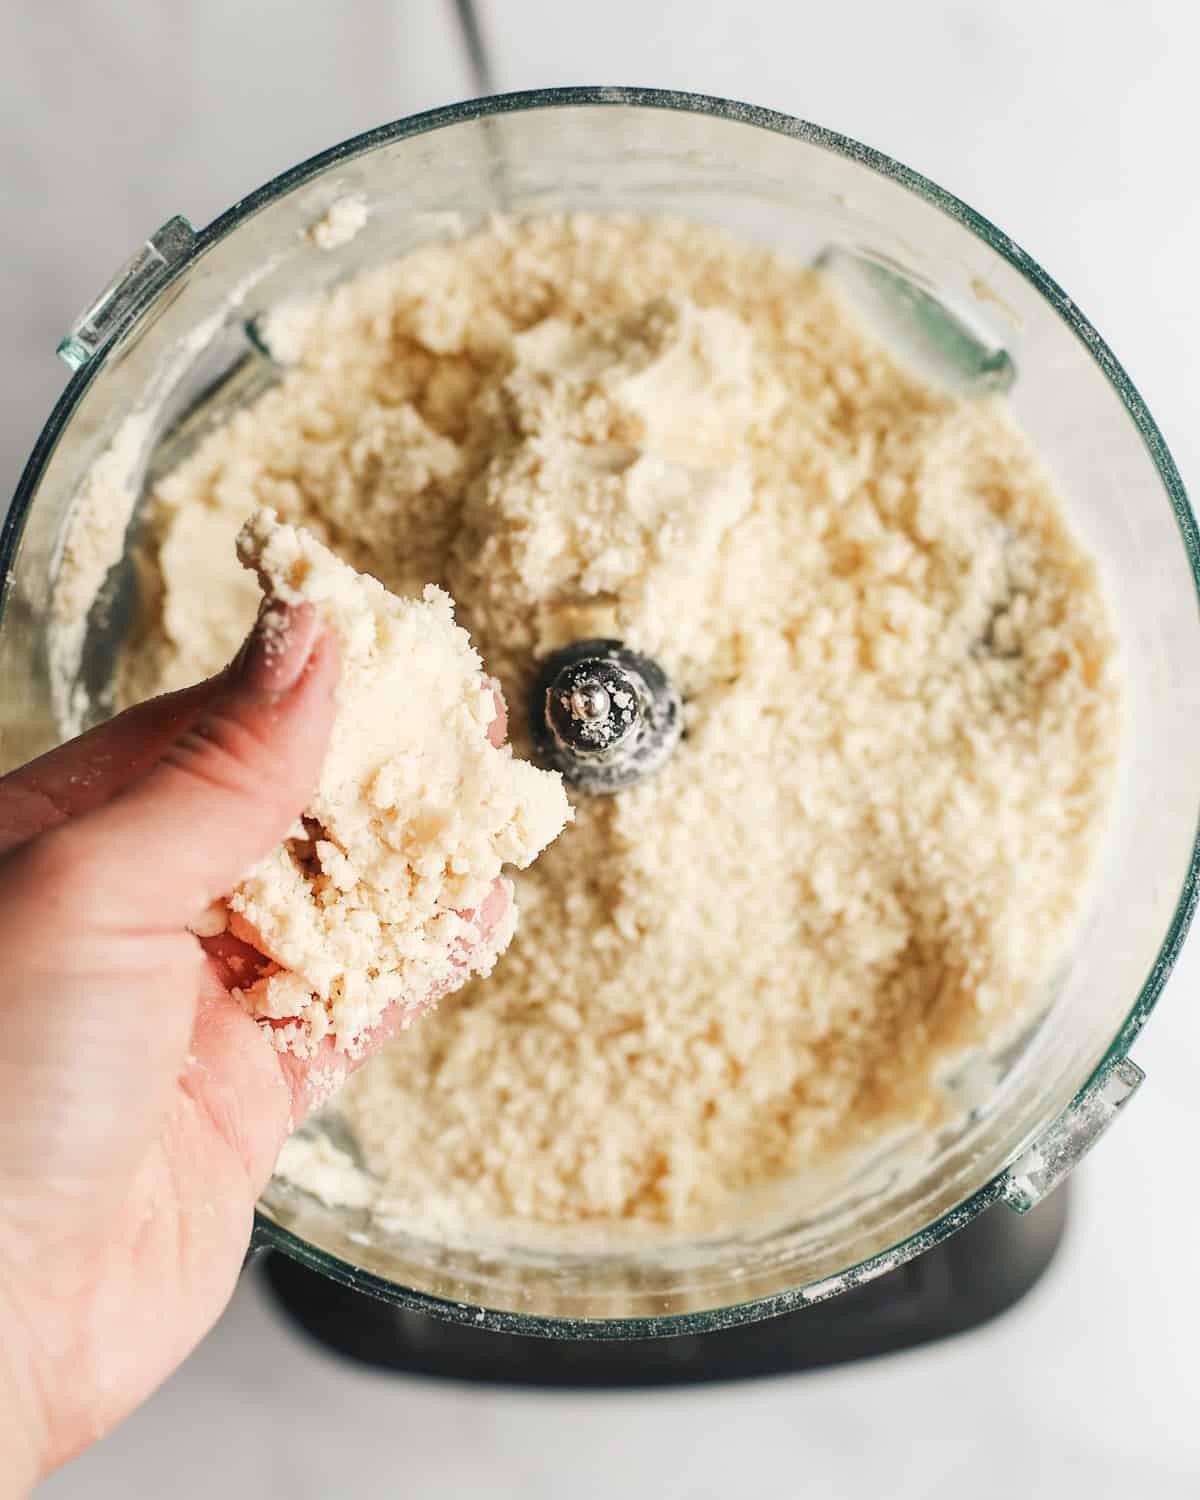 How to Make a Butter Pie Crust - hand pinching the dough together